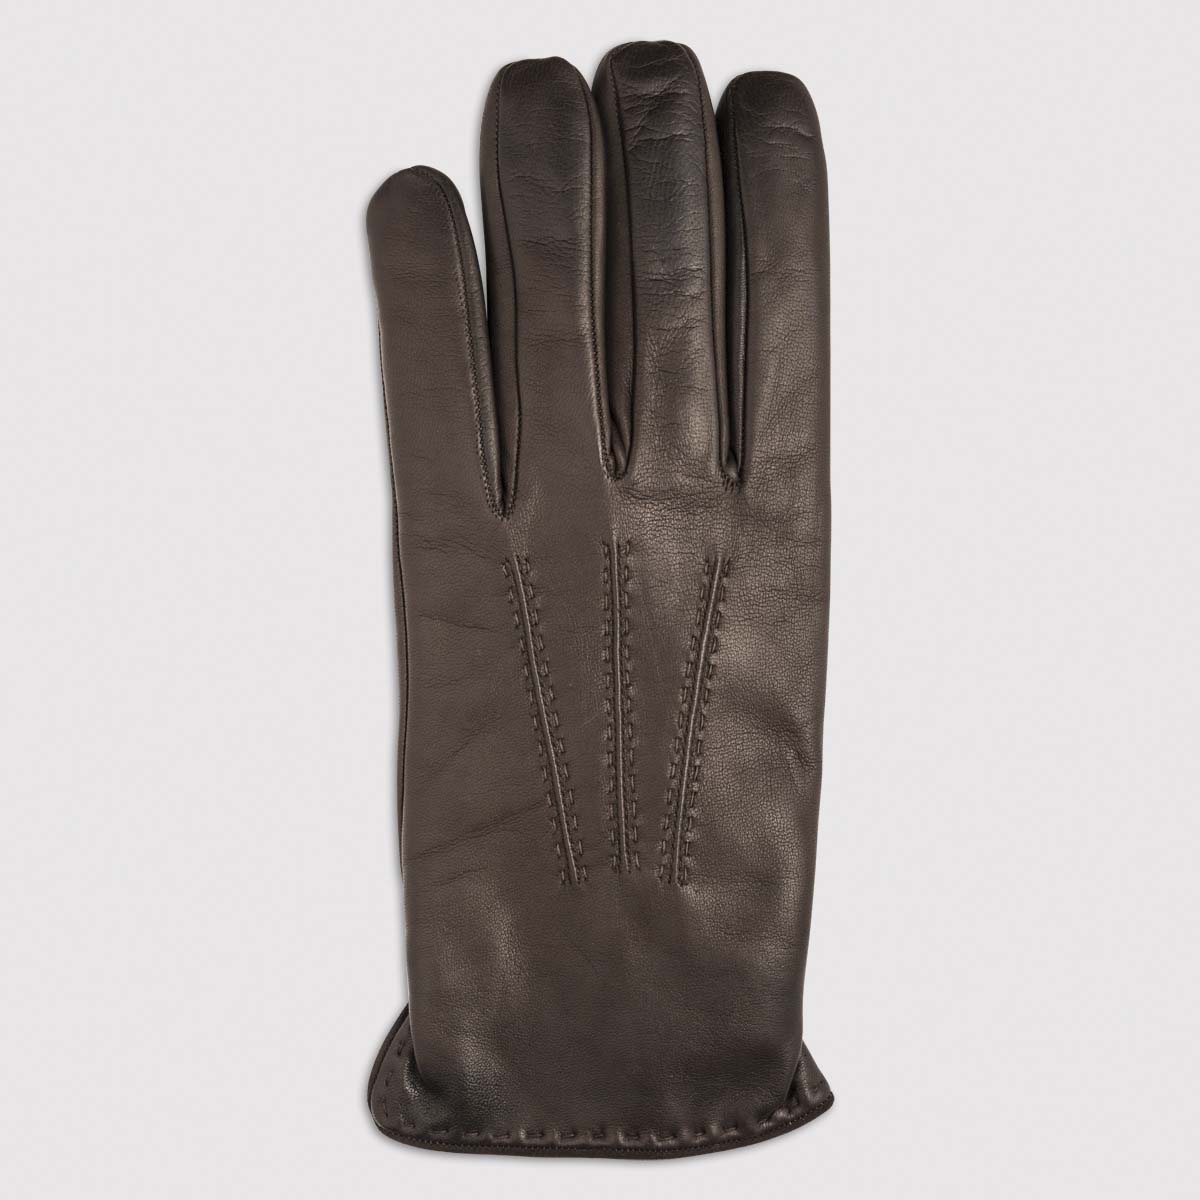 Nappa Leather Glove with Cashmere Lining in Mocca Alpo Guanti on sale 2022